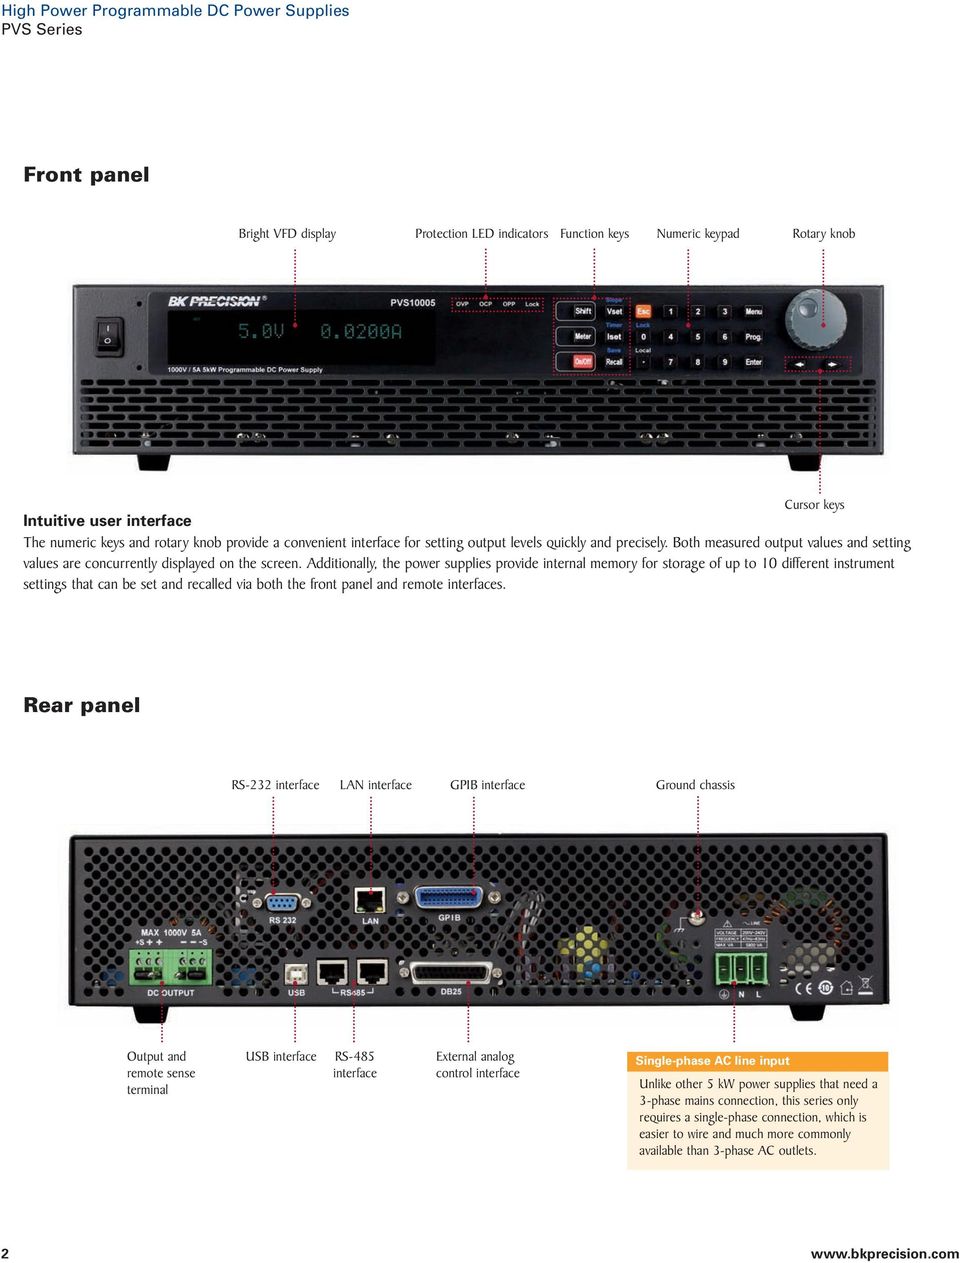 Additionally, the power supplies provide internal memory for storage of up to 10 different instrument settings that can be set and recalled via both the front panel and remote interfaces.